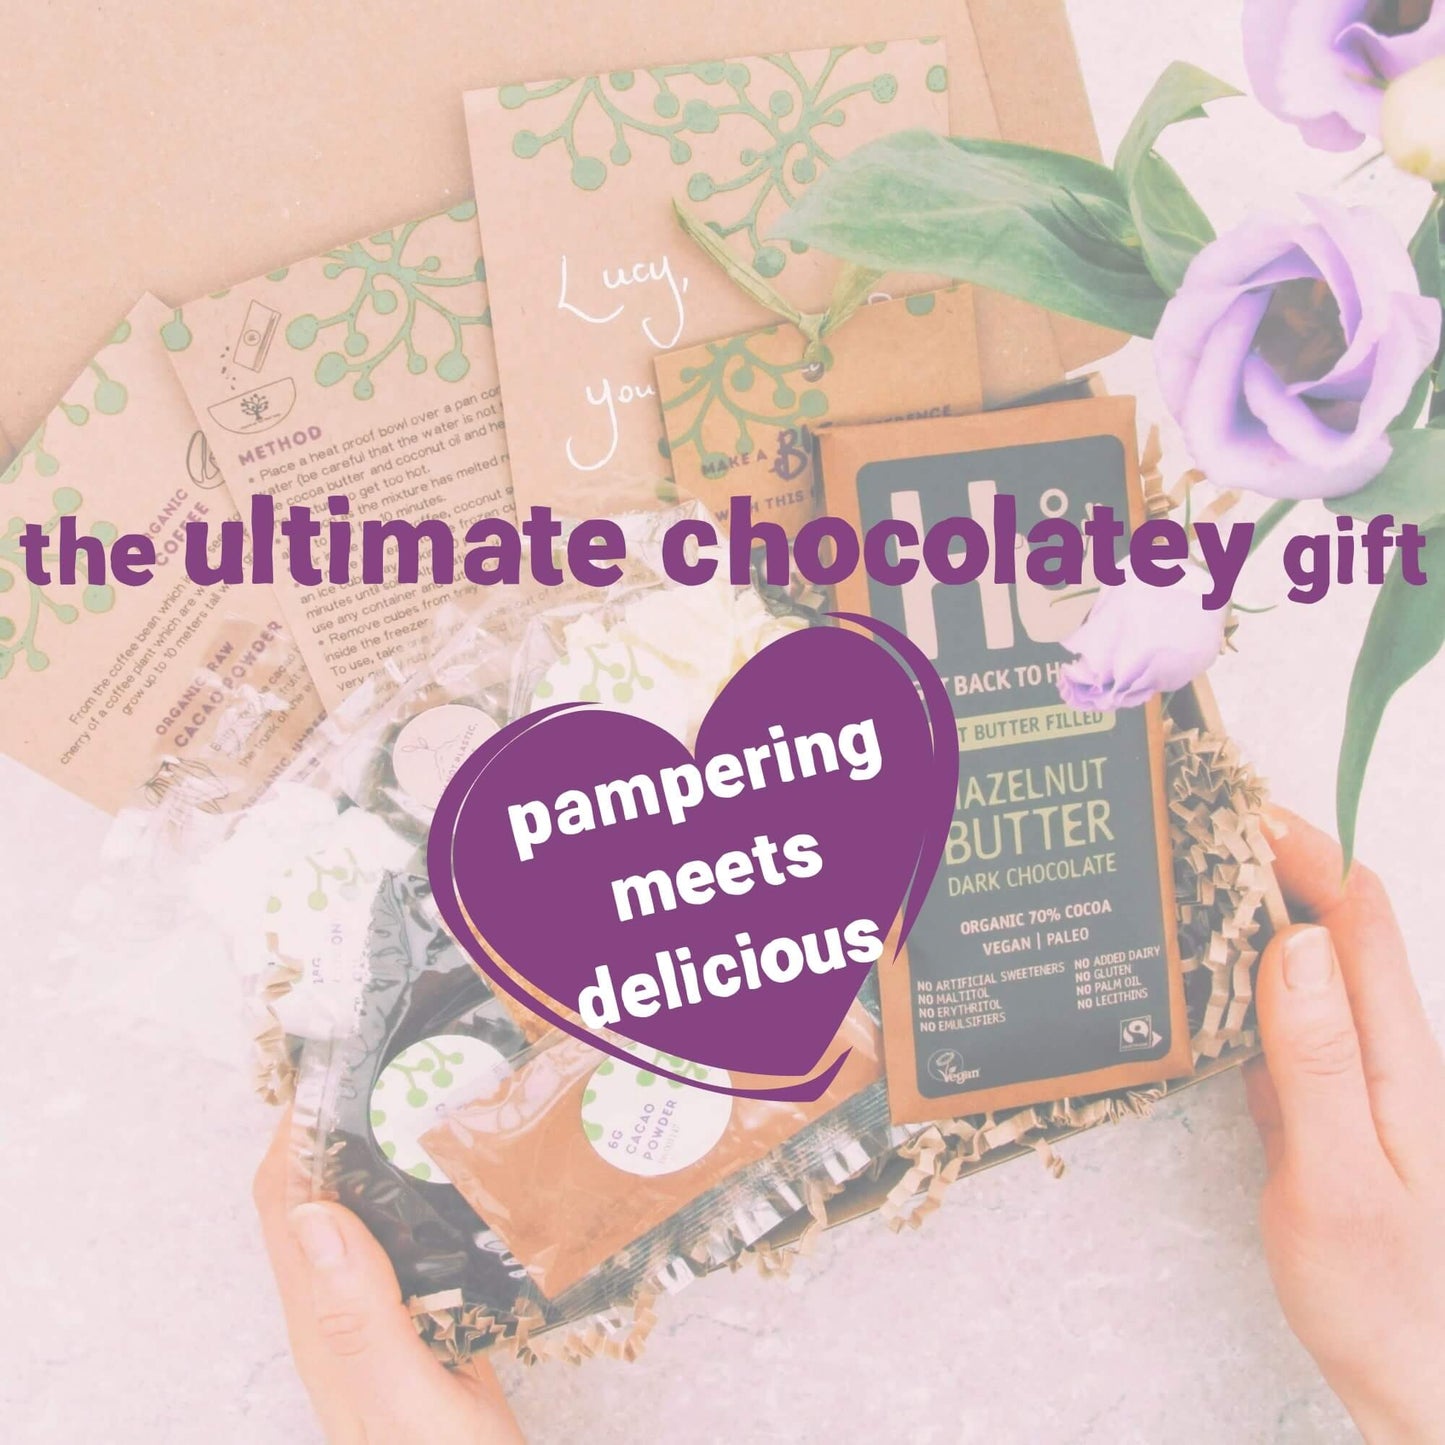 eco-friendly pamper and chocolate inside letterbox gift box